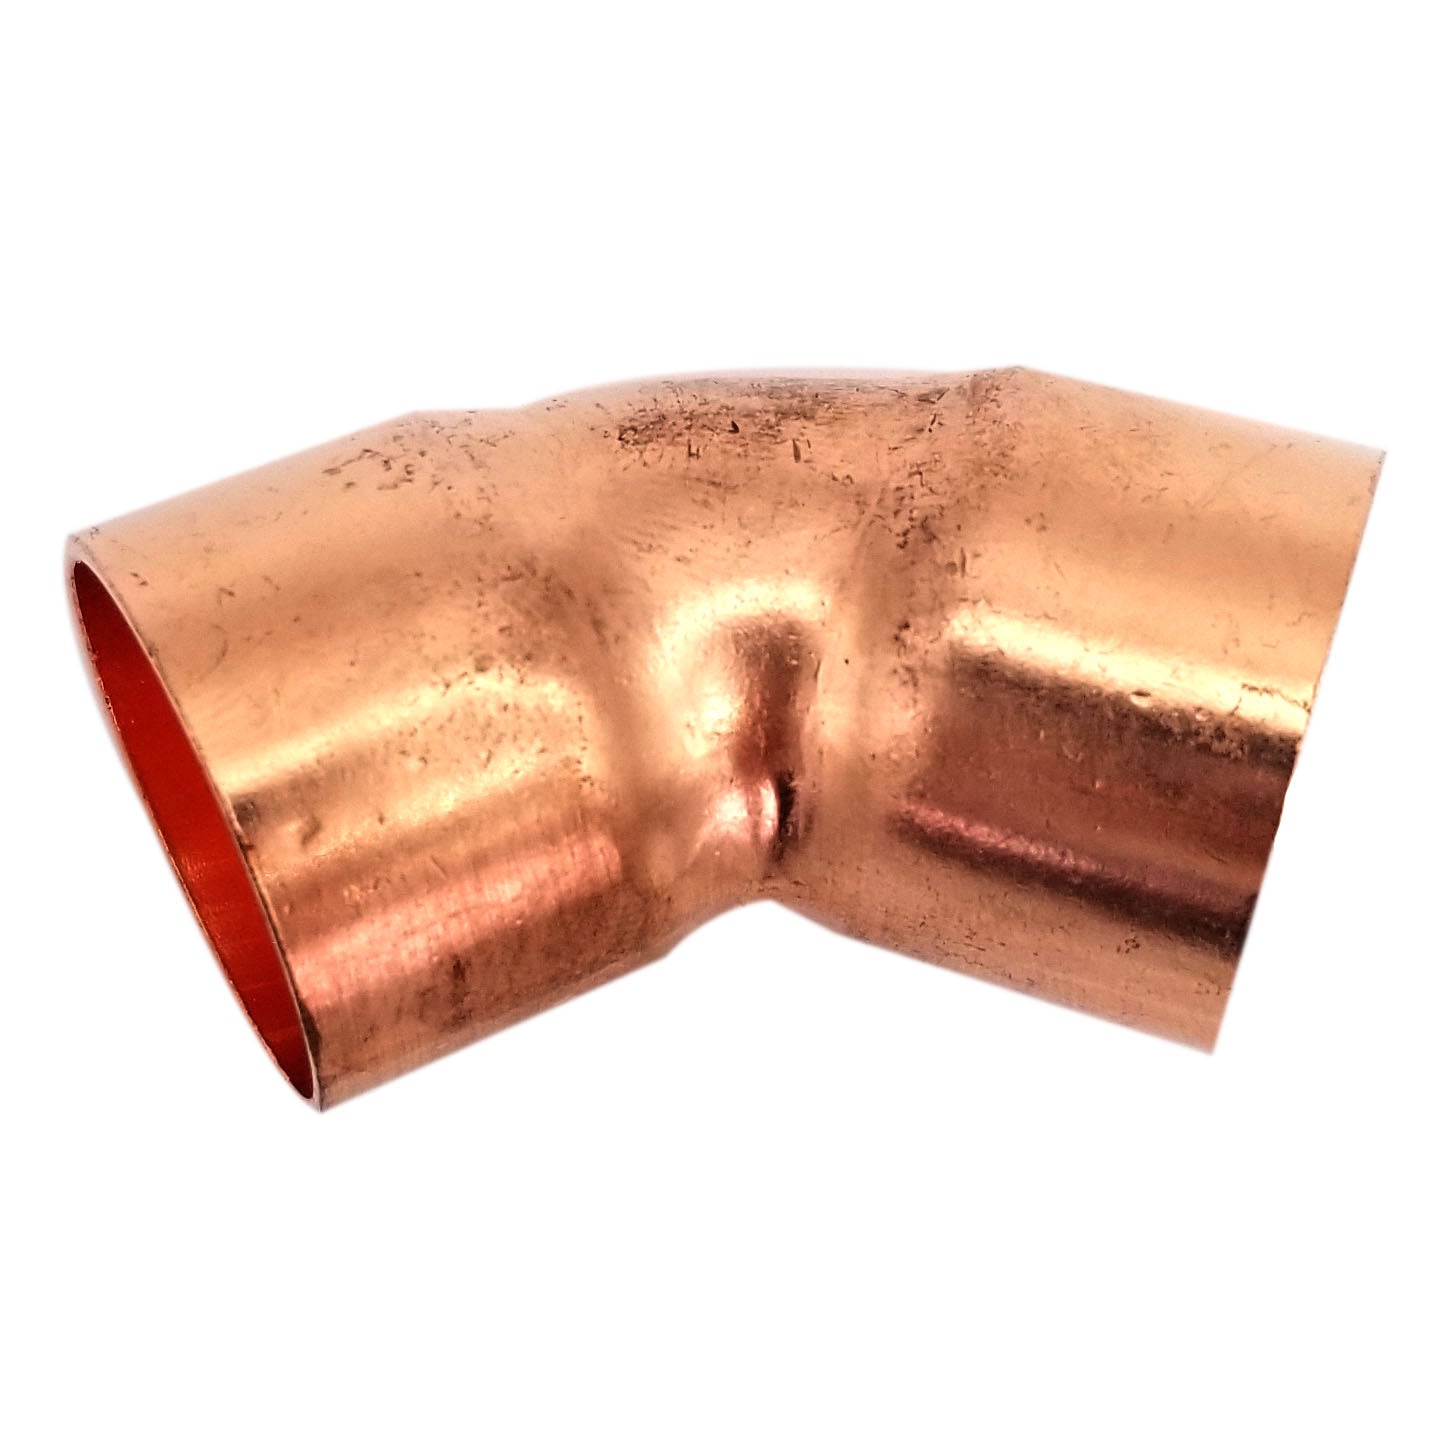 Copper Fitting 1-1/8 Inch (HVAC Outer Dimension) 1 Inch (Plumbing Inner Dimension) - 45 Degree Copper Pressure Elbow & HVAC – 99.9% Pure Copper - 10 Pack